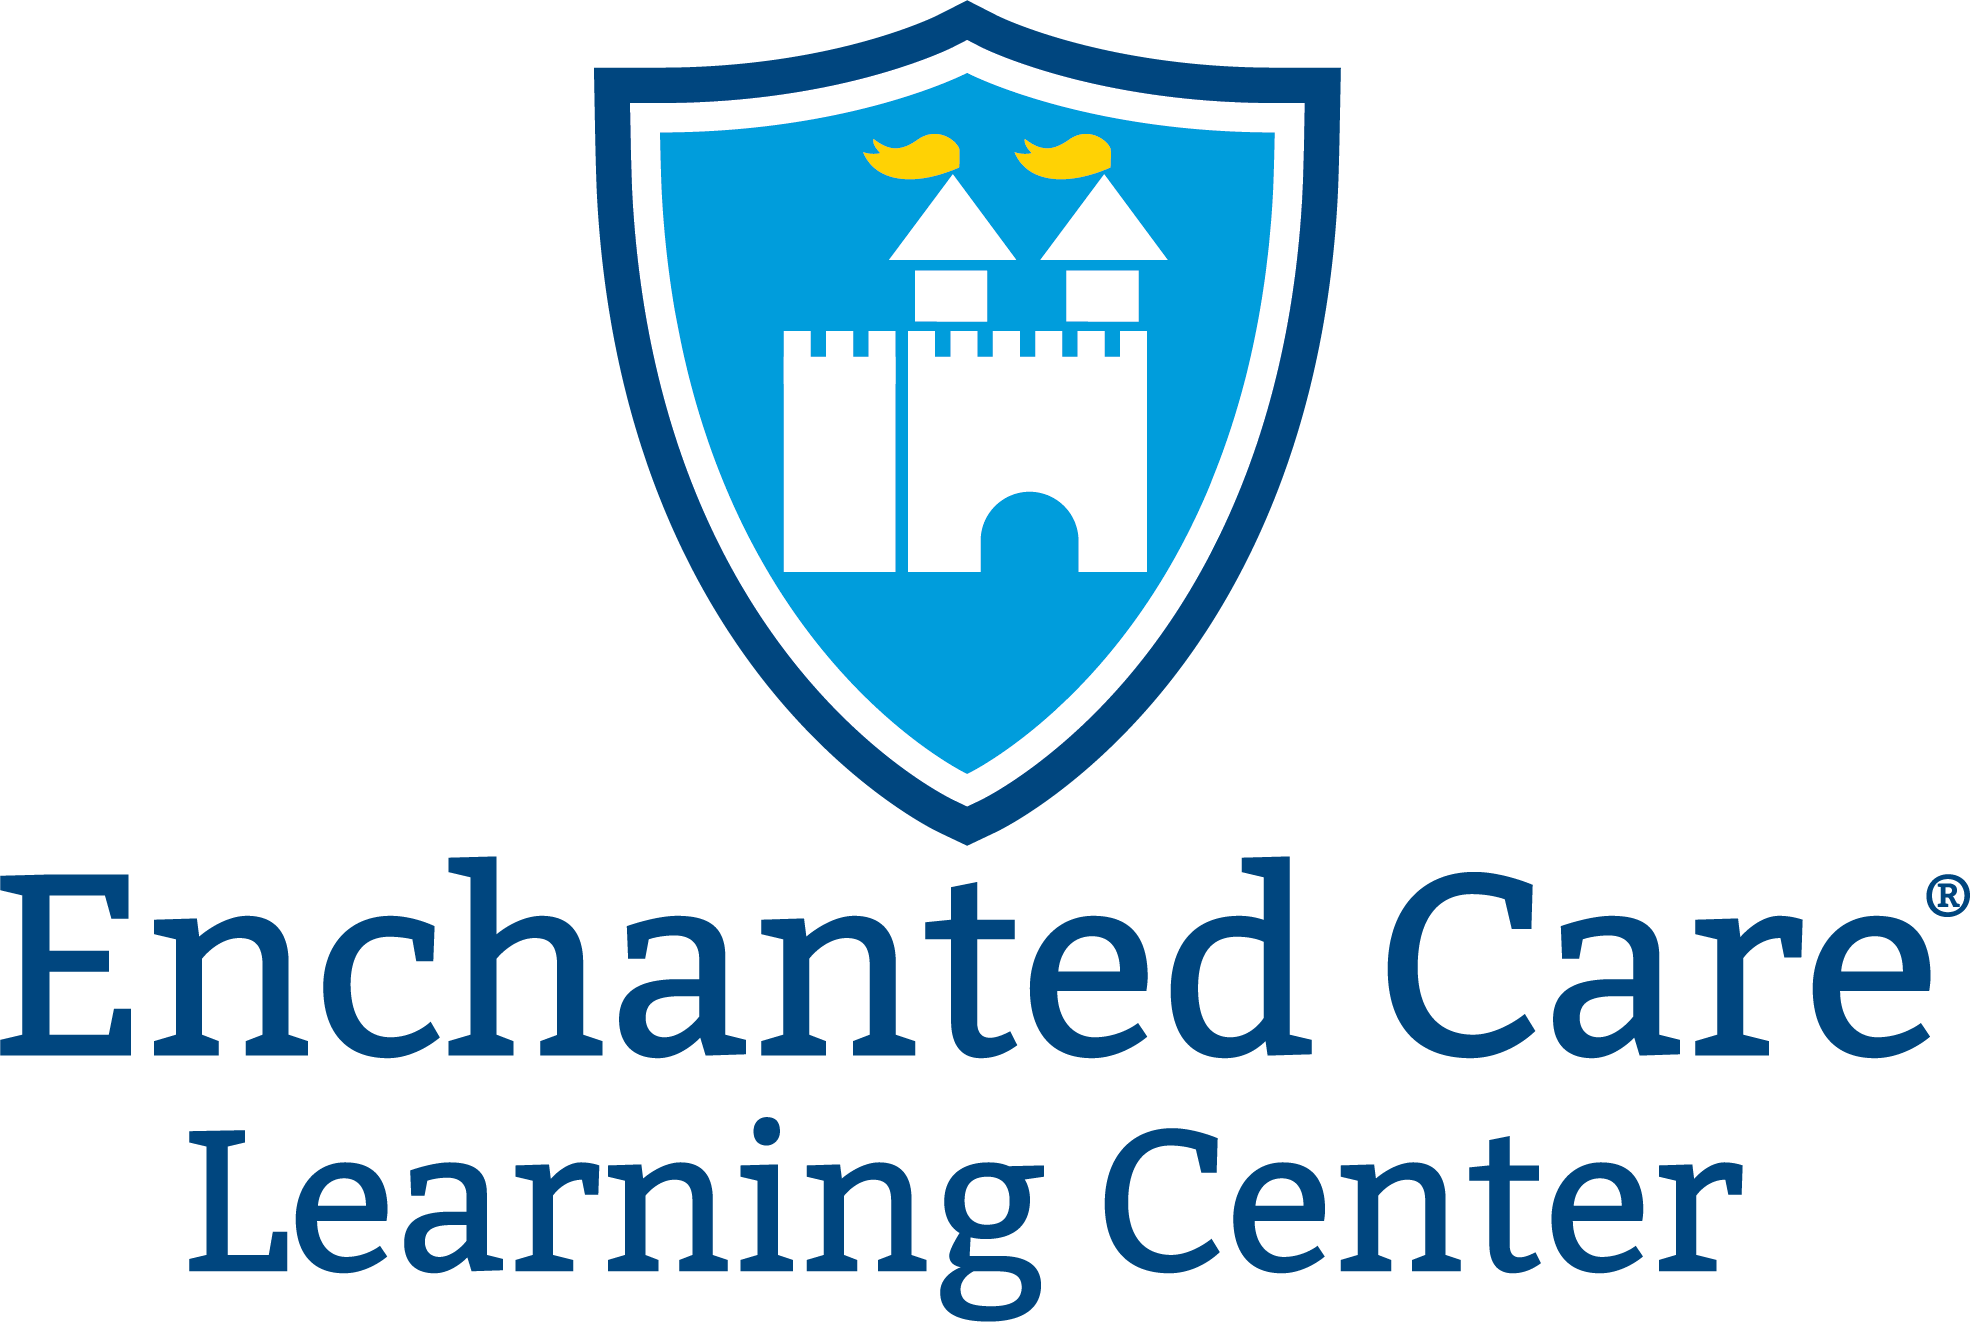 ENCHANTED CARE LEARNIG CENTER